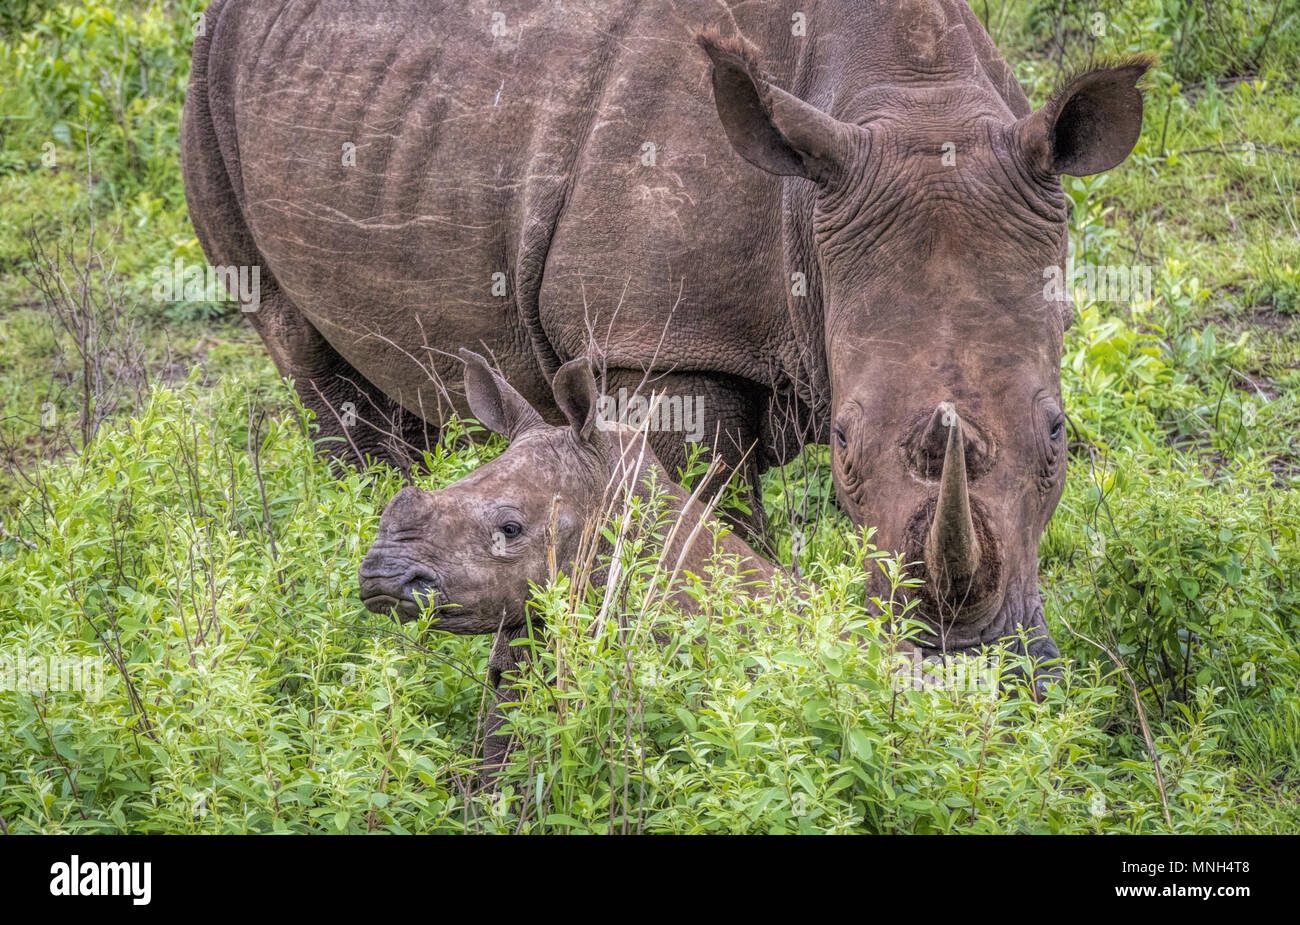 An endangered  White or Square-lipped Rhinoceros (Ceratotherium simum) keeping watch over  her baby calf as it hides in the tall grass in South Africa Stock Photo